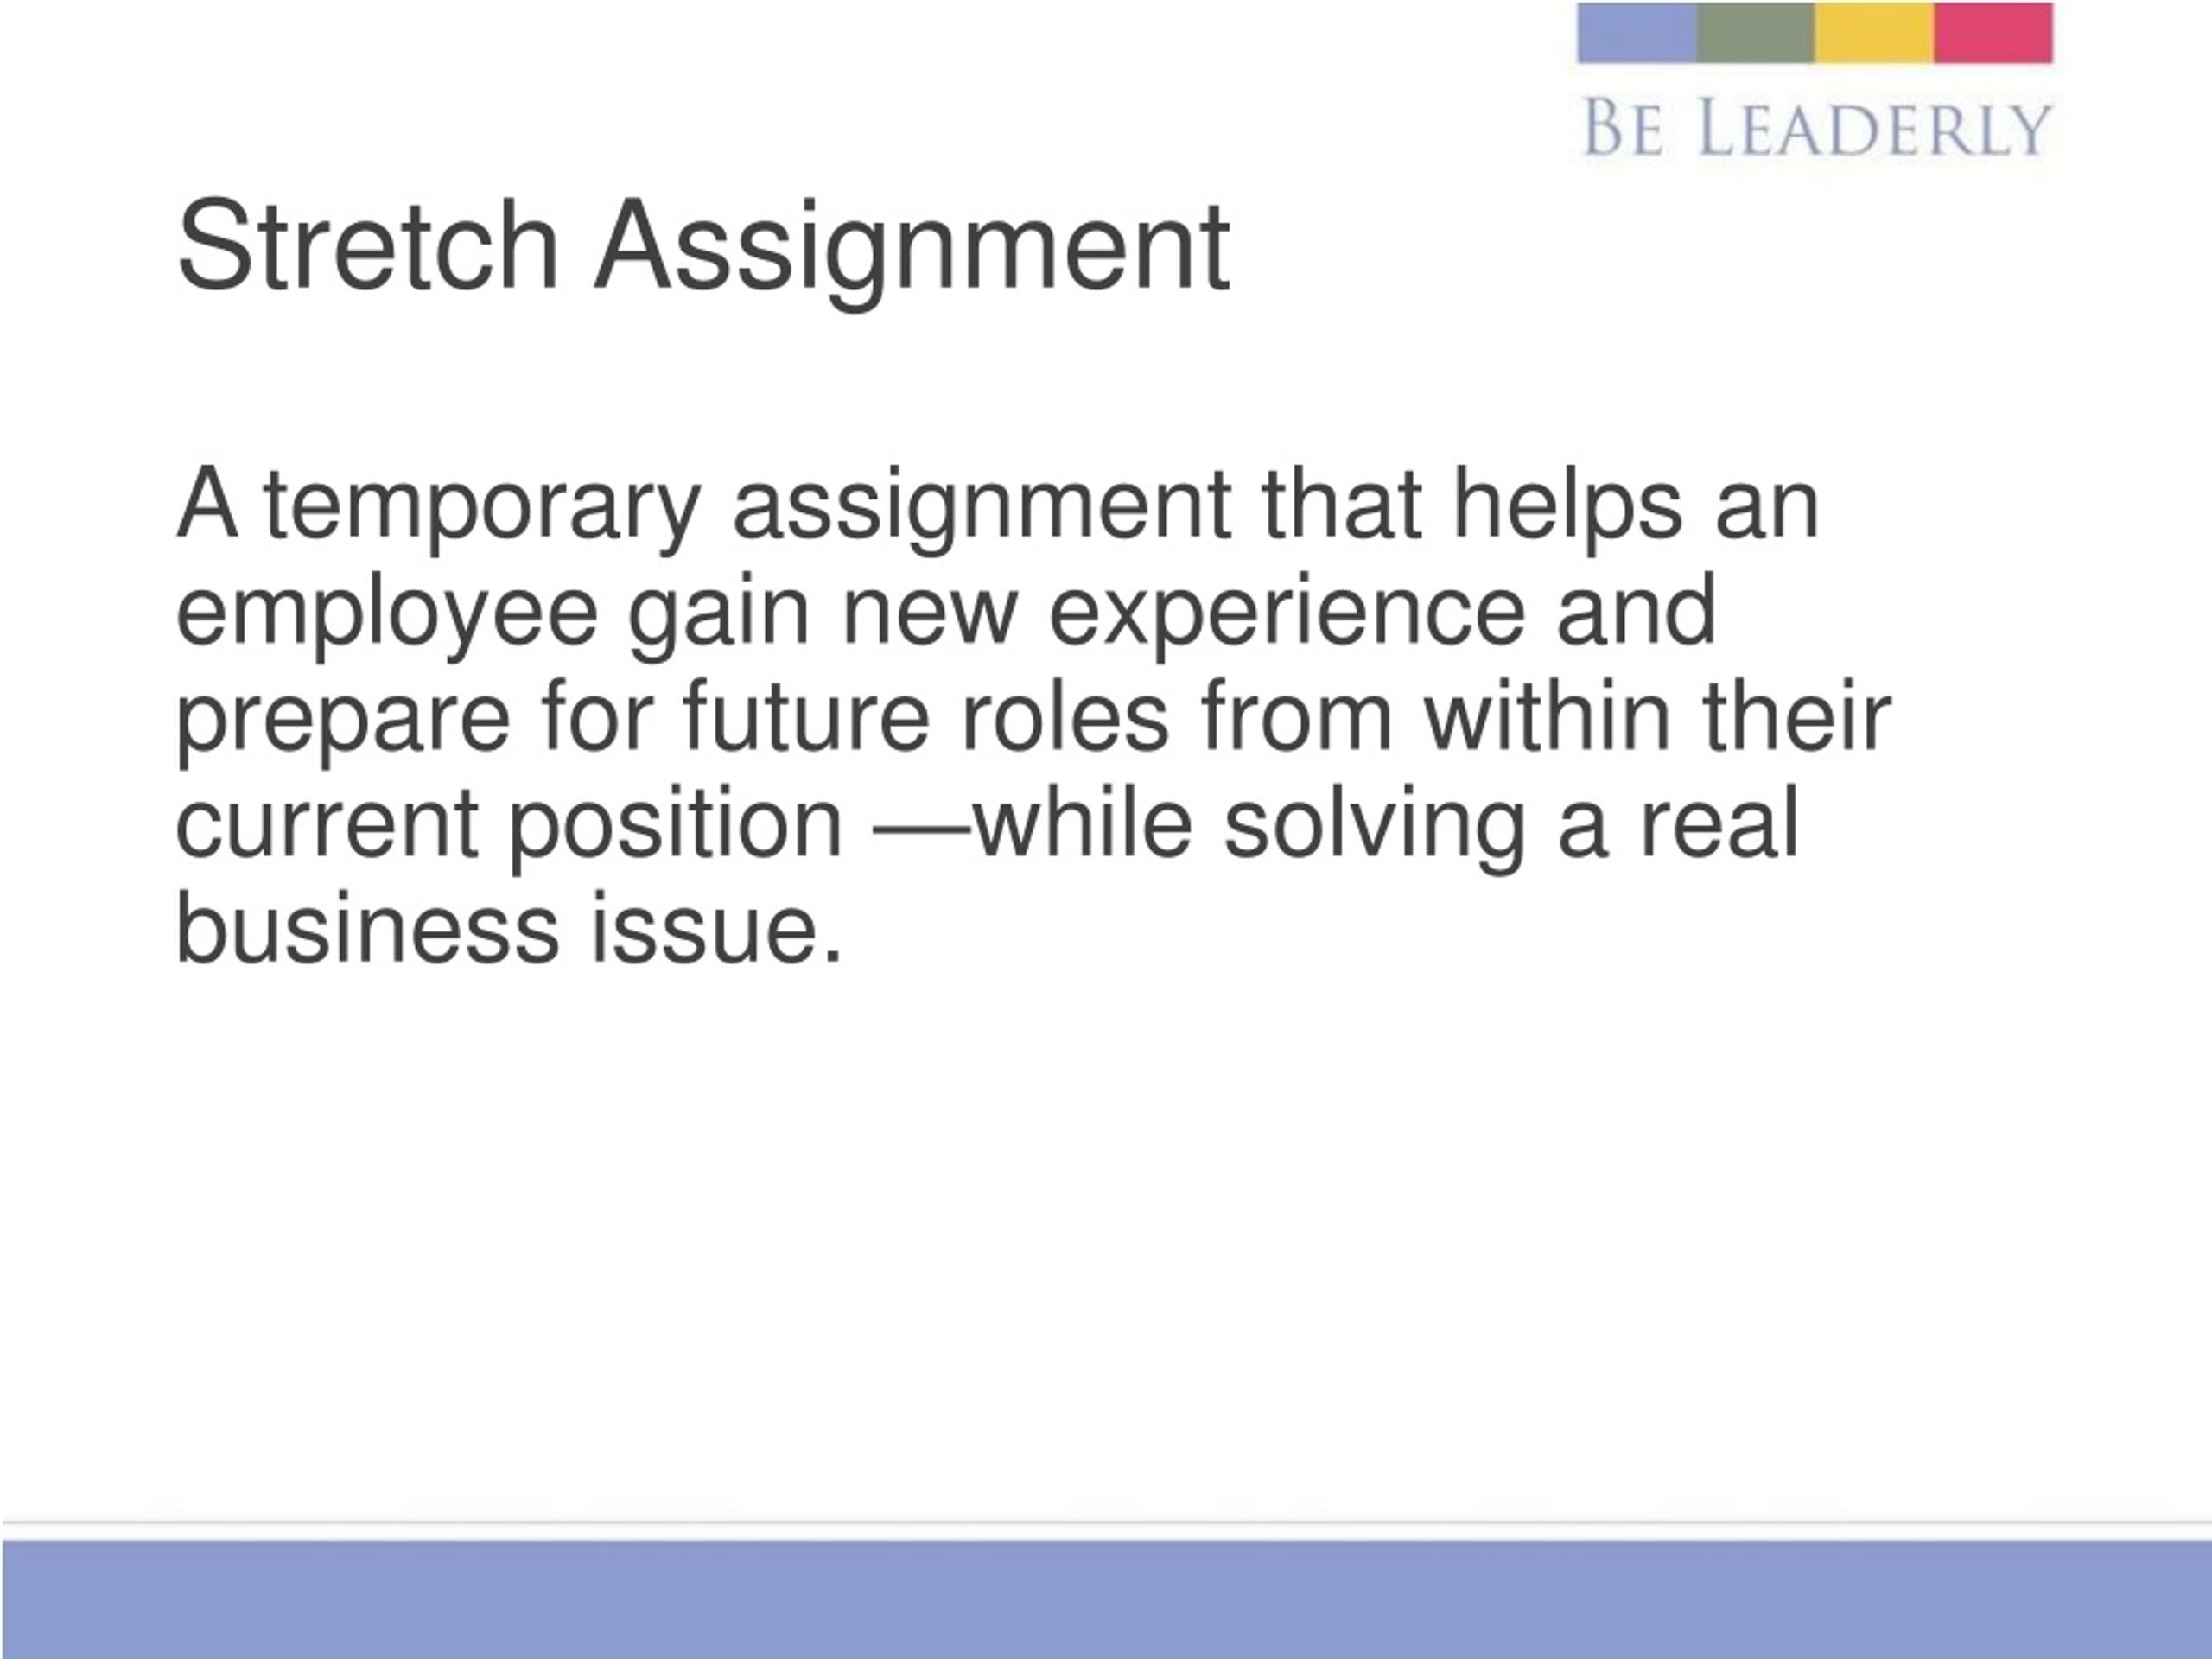 definition of stretch assignment